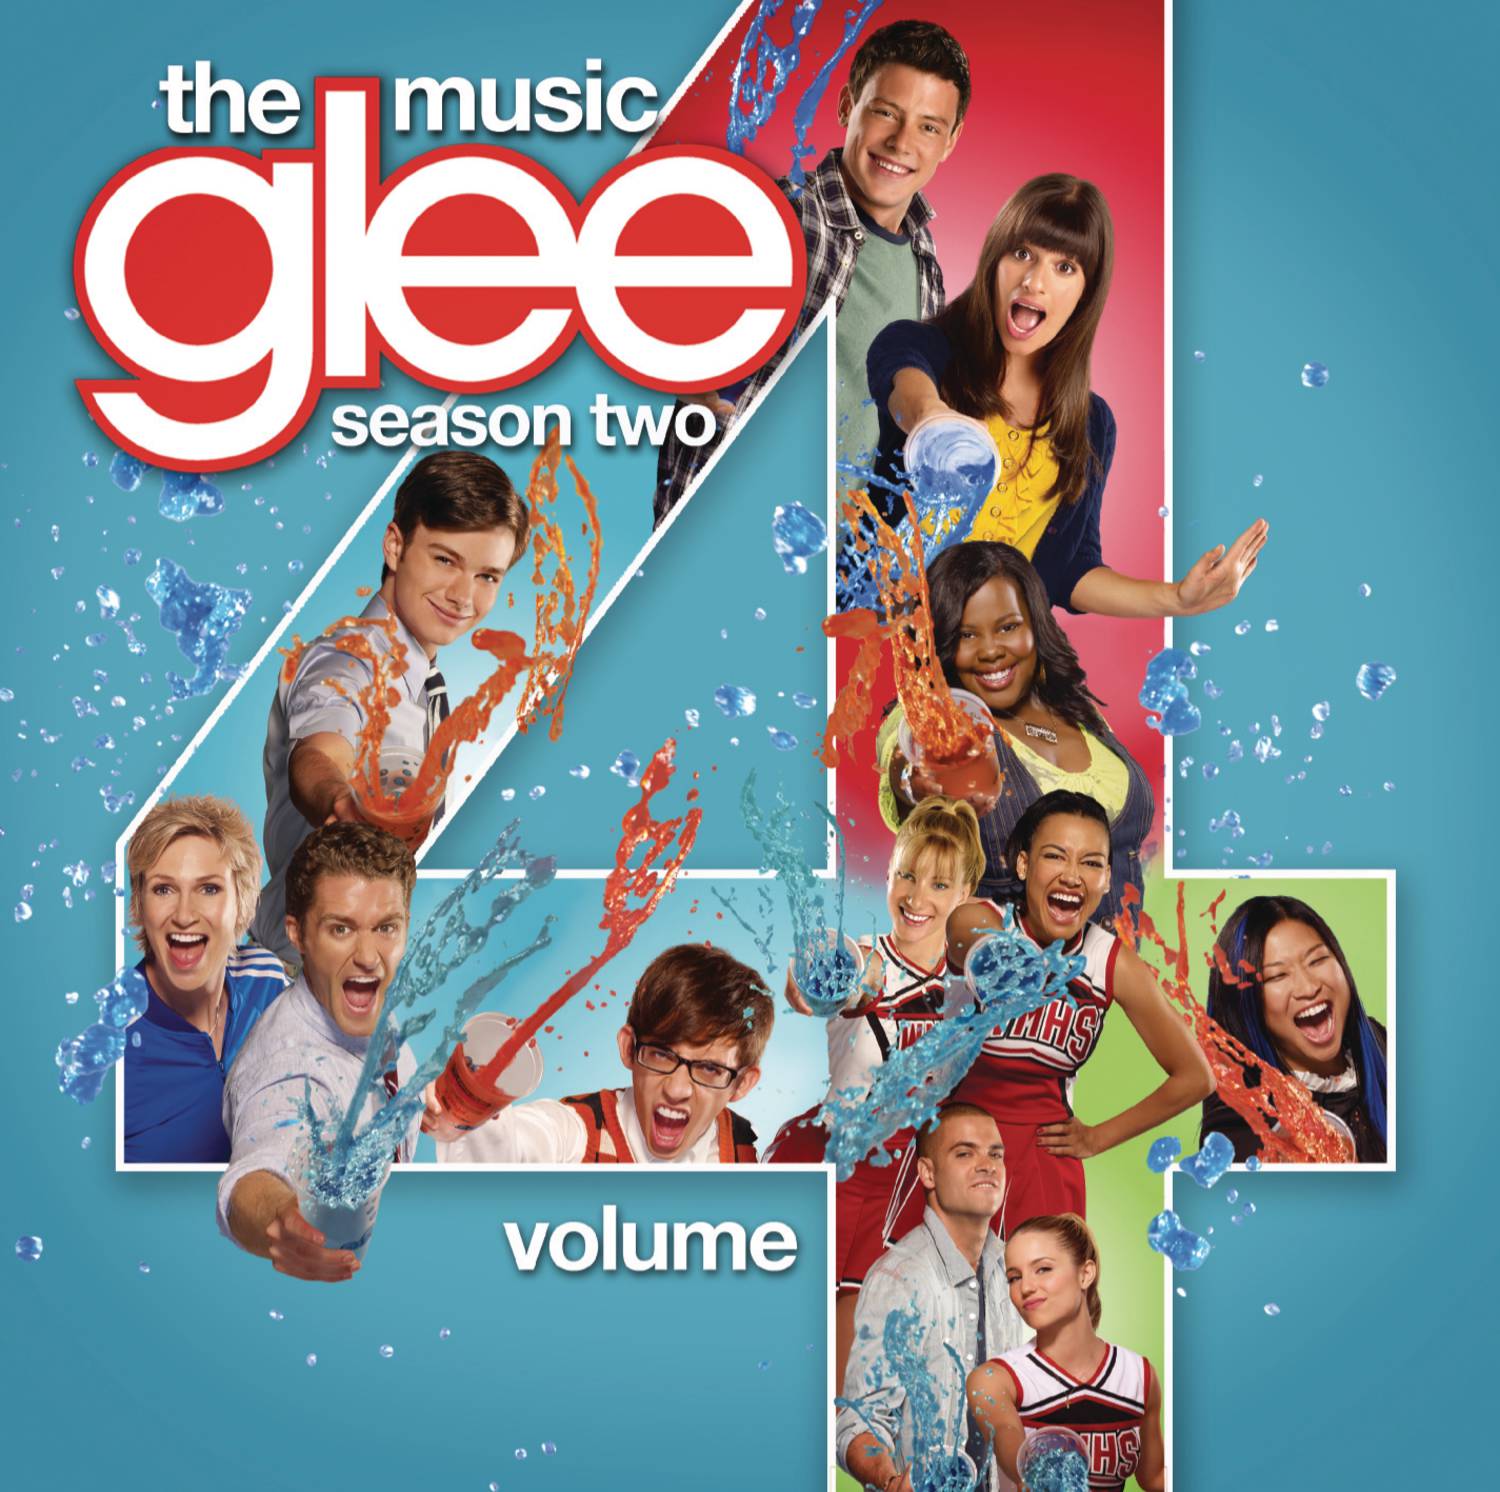 Total Eclipse Of The Heart (Glee Cast Version featuring Jonathan Groff)